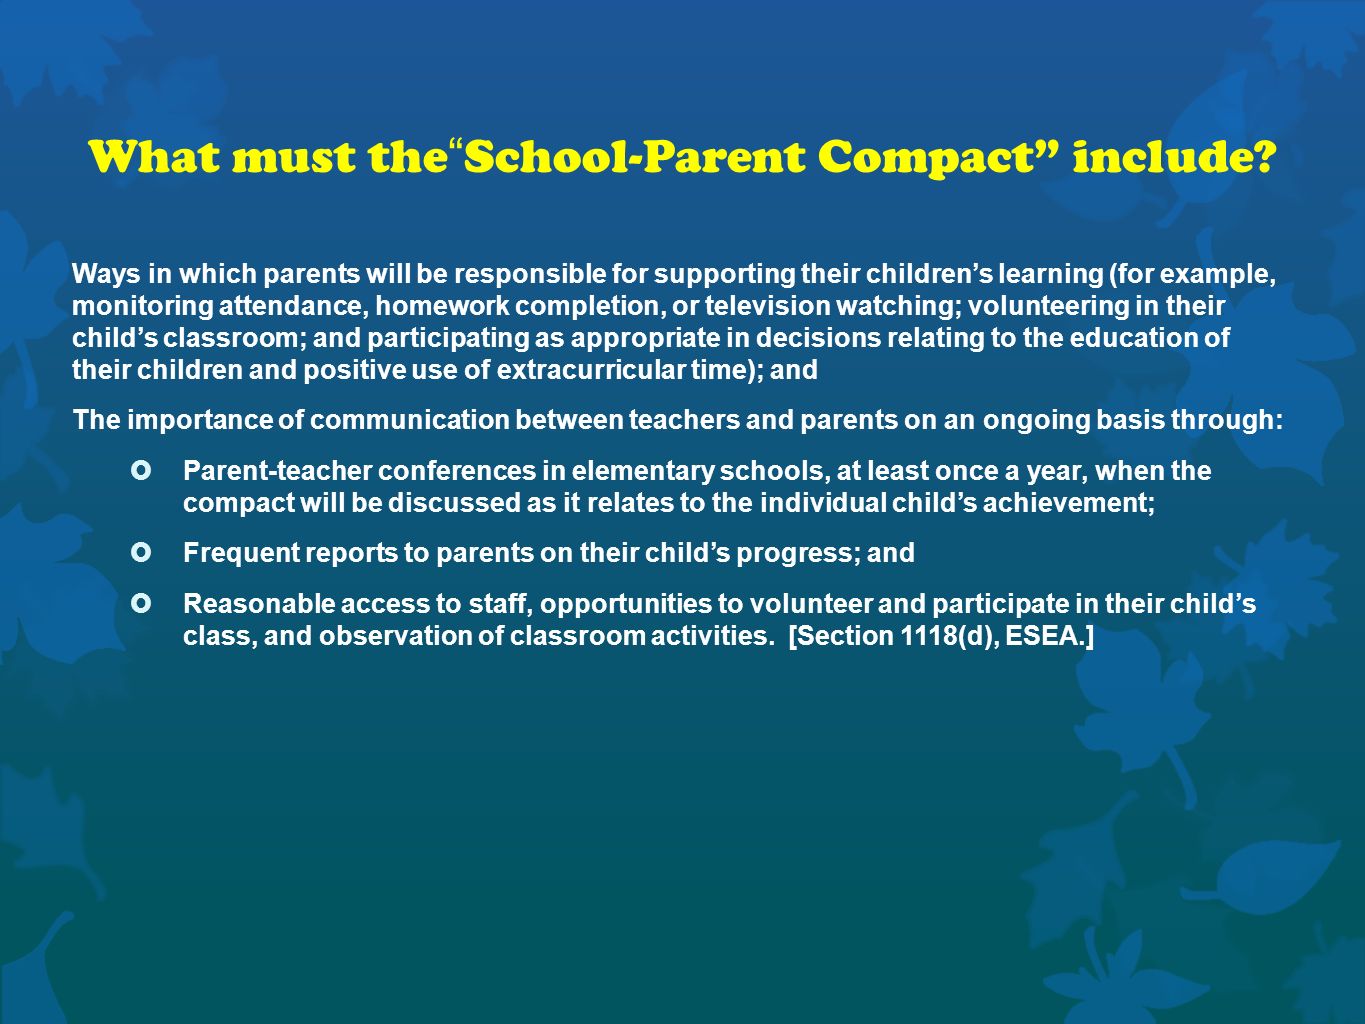 What must the School-Parent Compact include